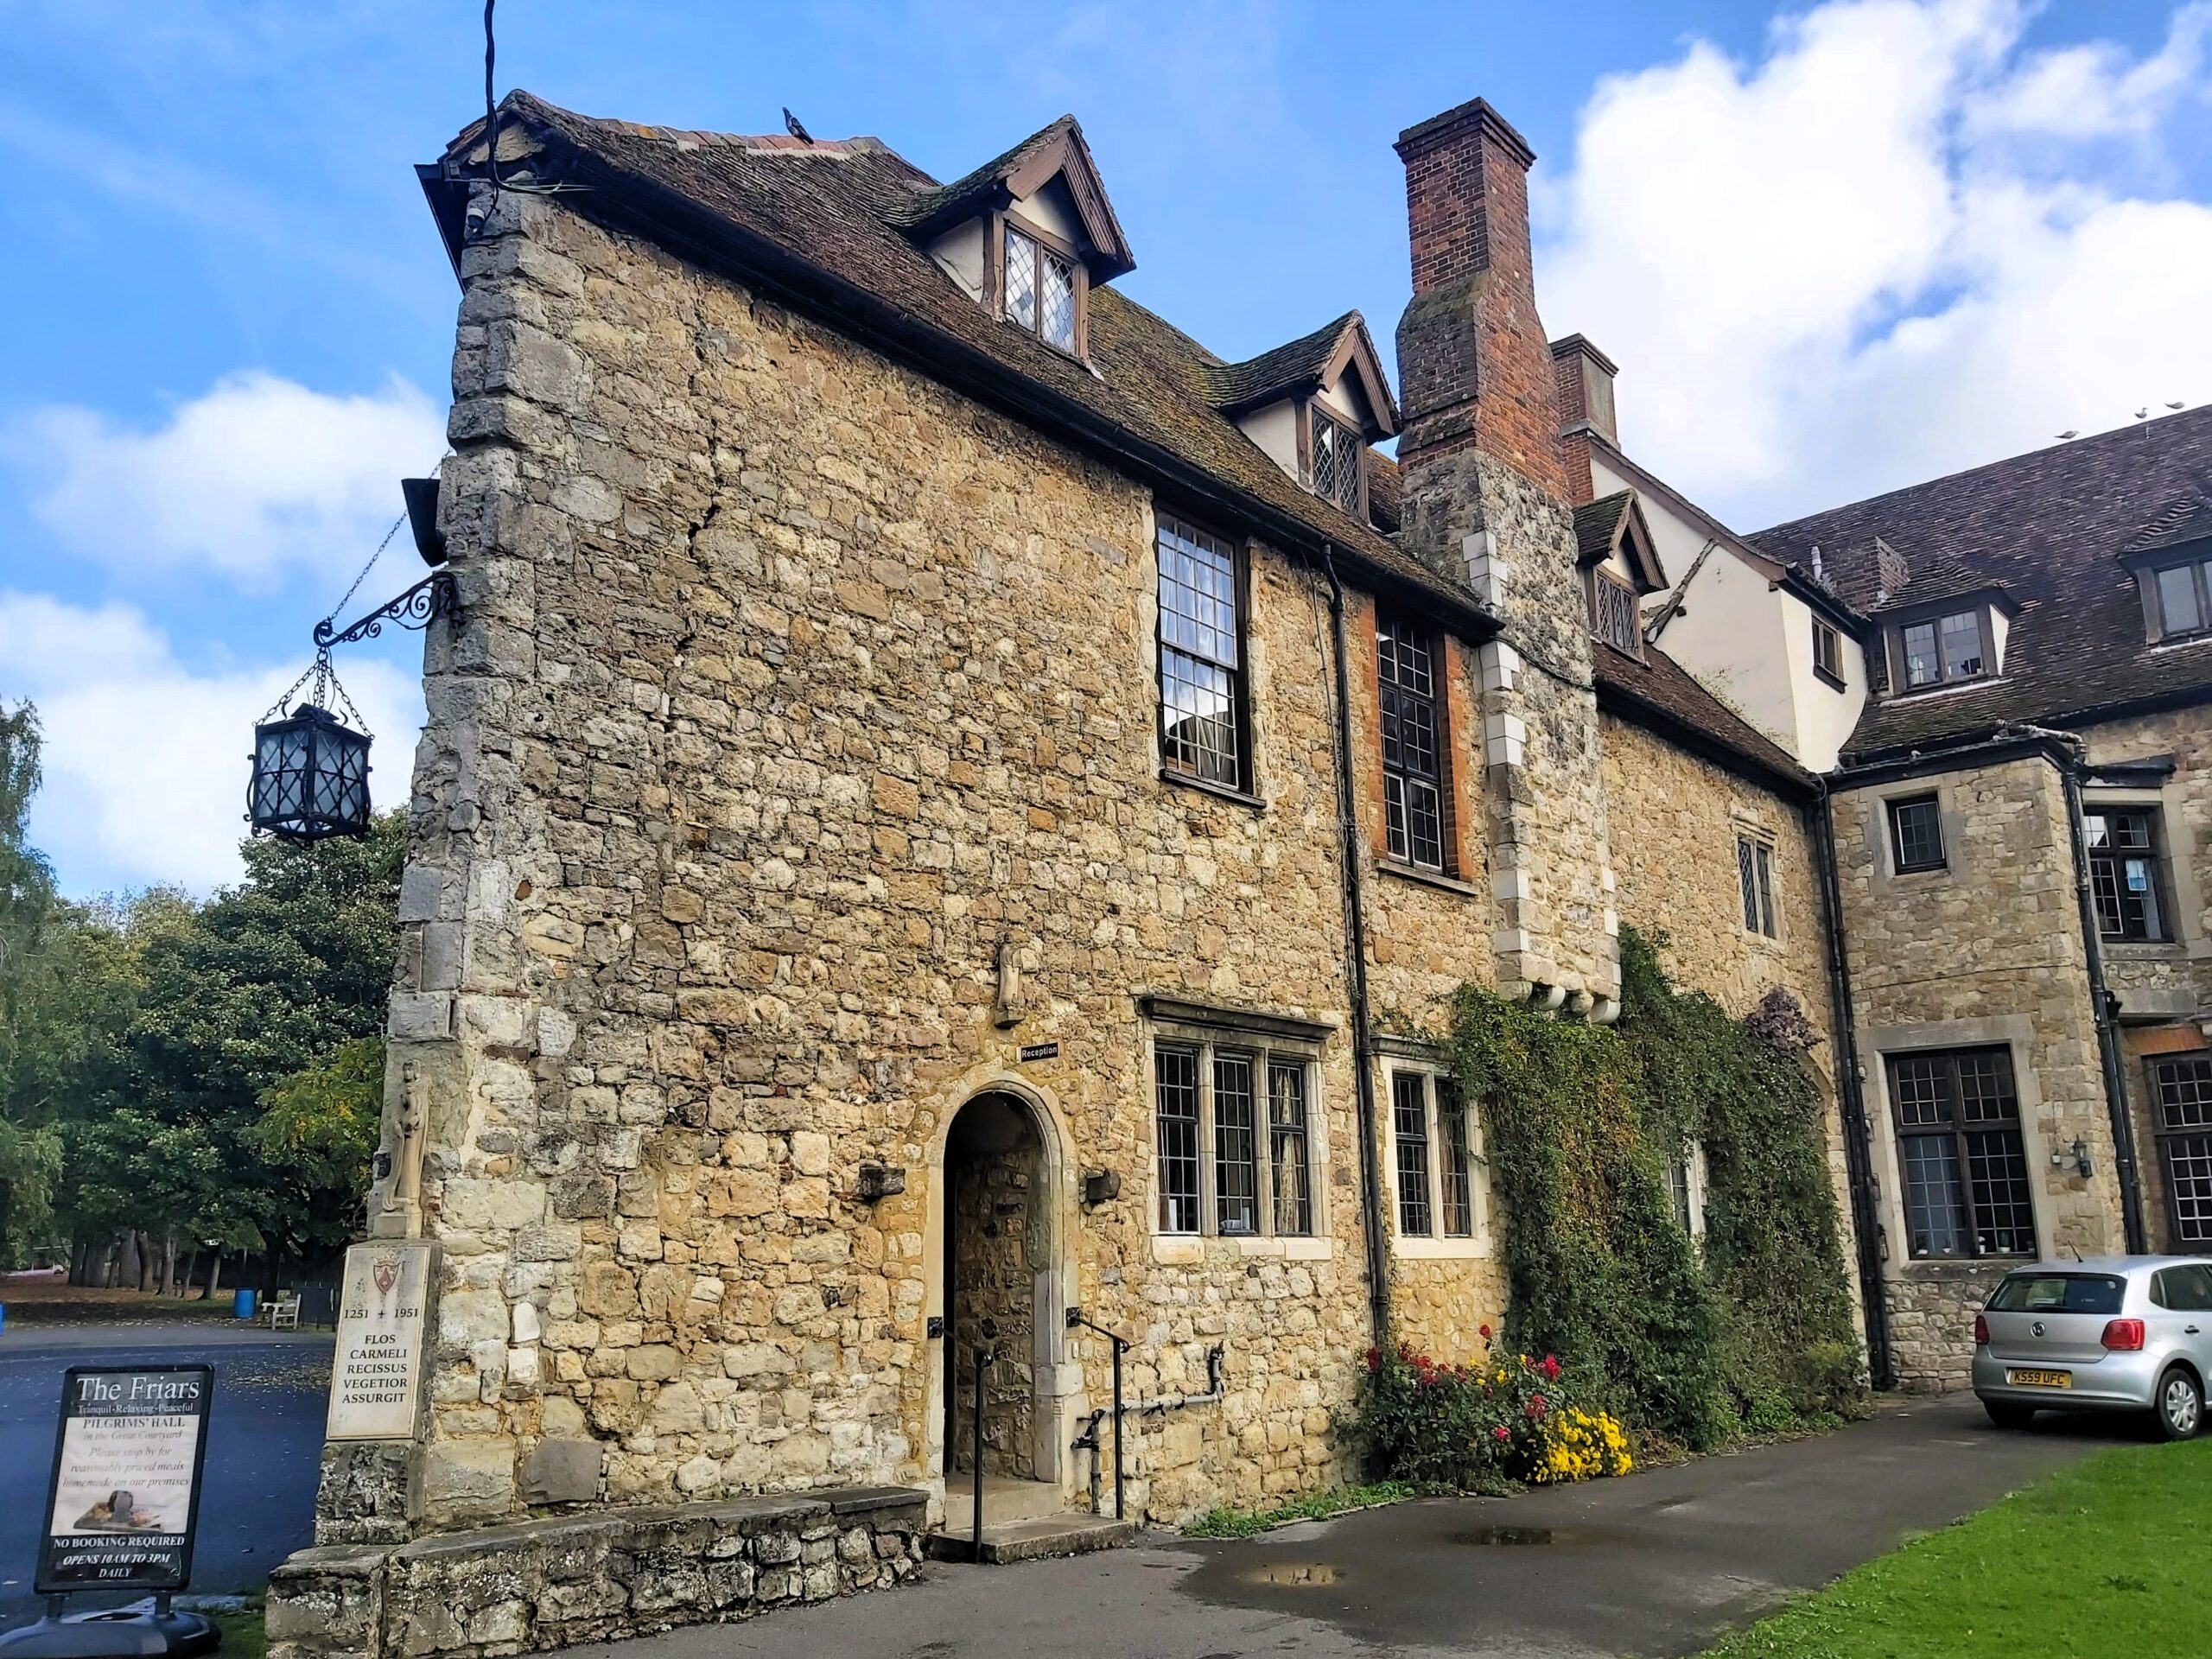 An old building in The Friars Aylesford Priory, Kent, England